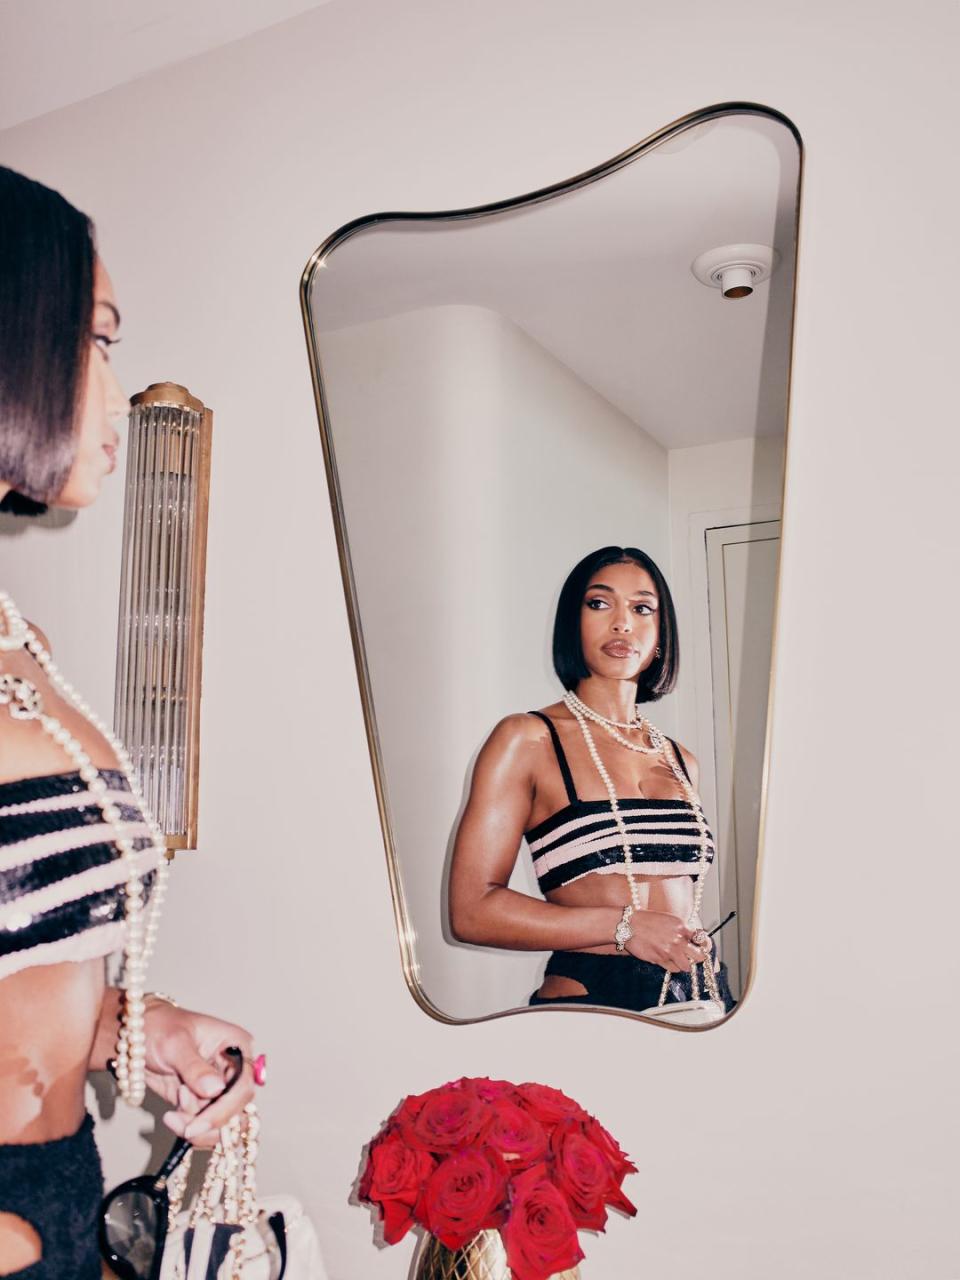 lori harvey getting ready for chanel cruise in miami 2023 show